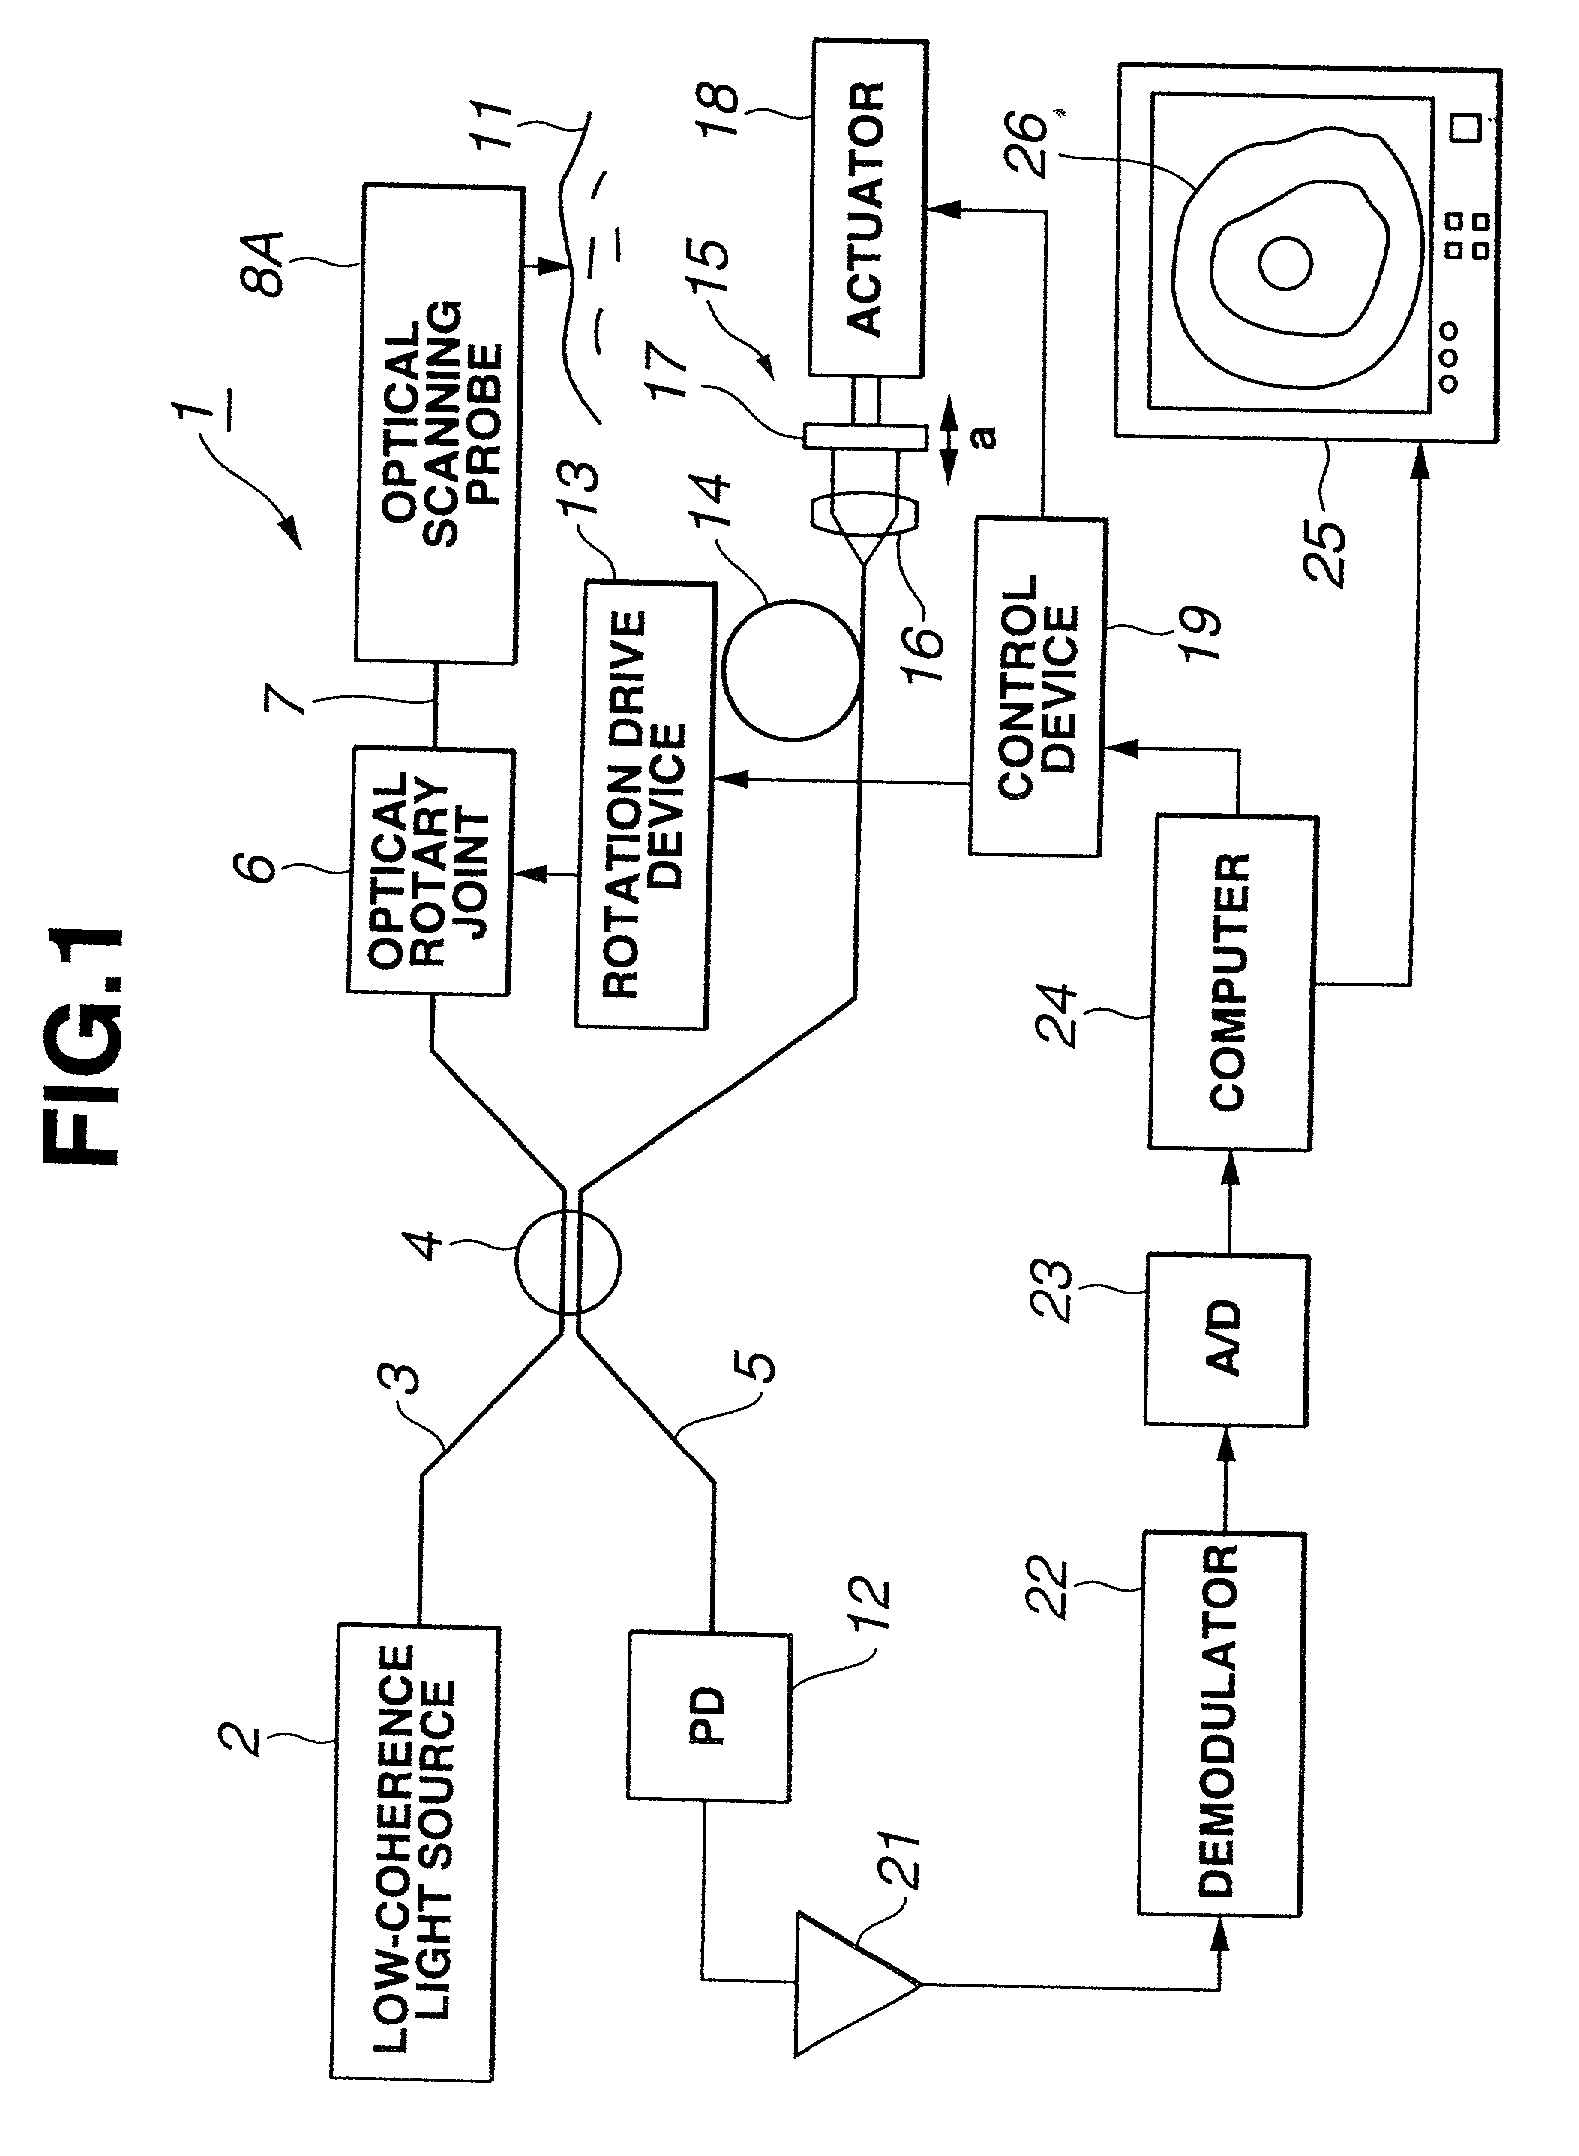 Optical scanning probe device using low coherence light